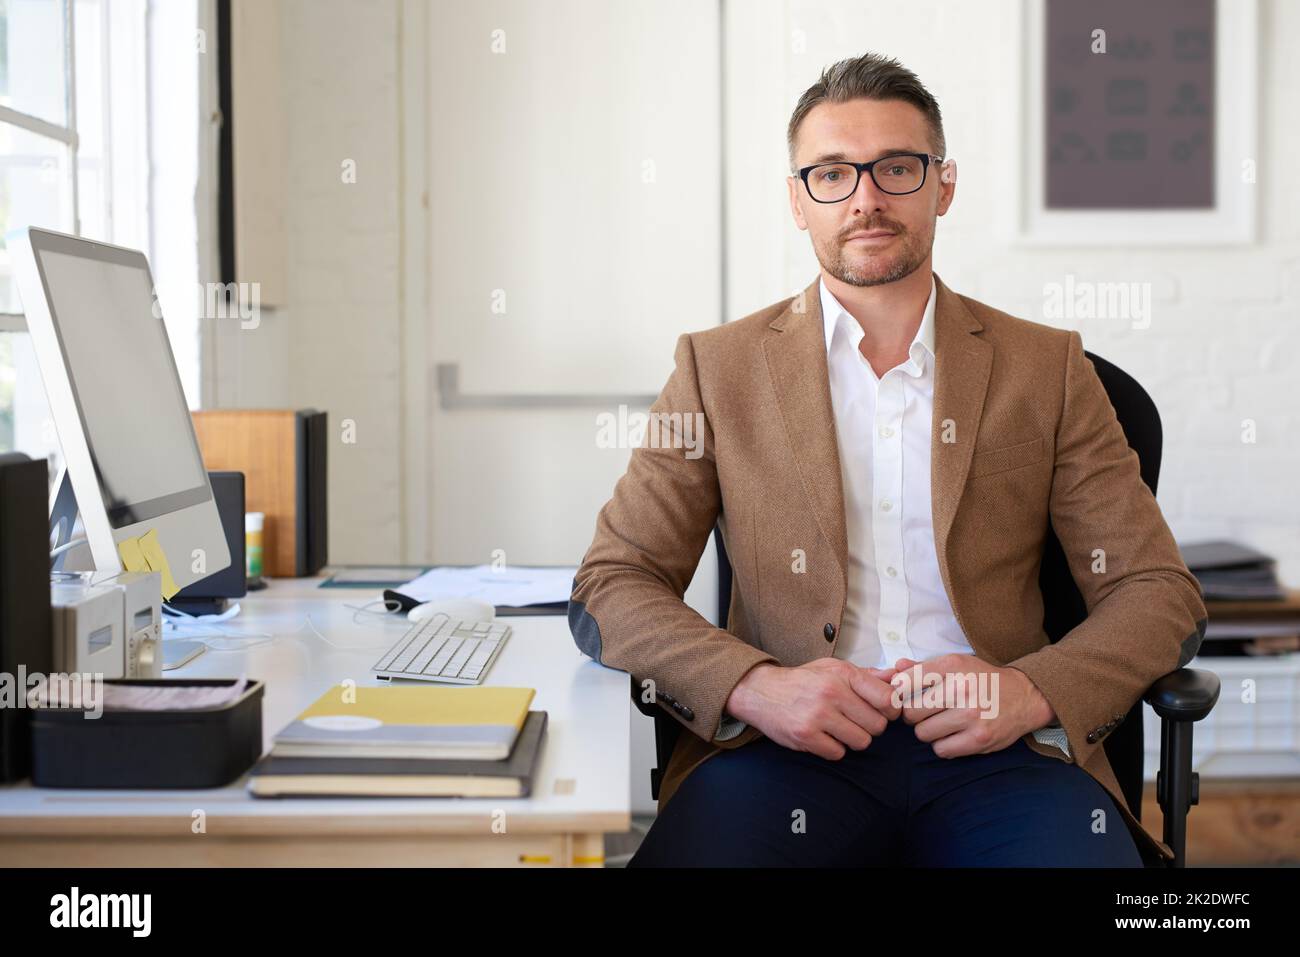 When you need innovation you trust. Portrait of a positive mature creative professional at his desk. Stock Photo